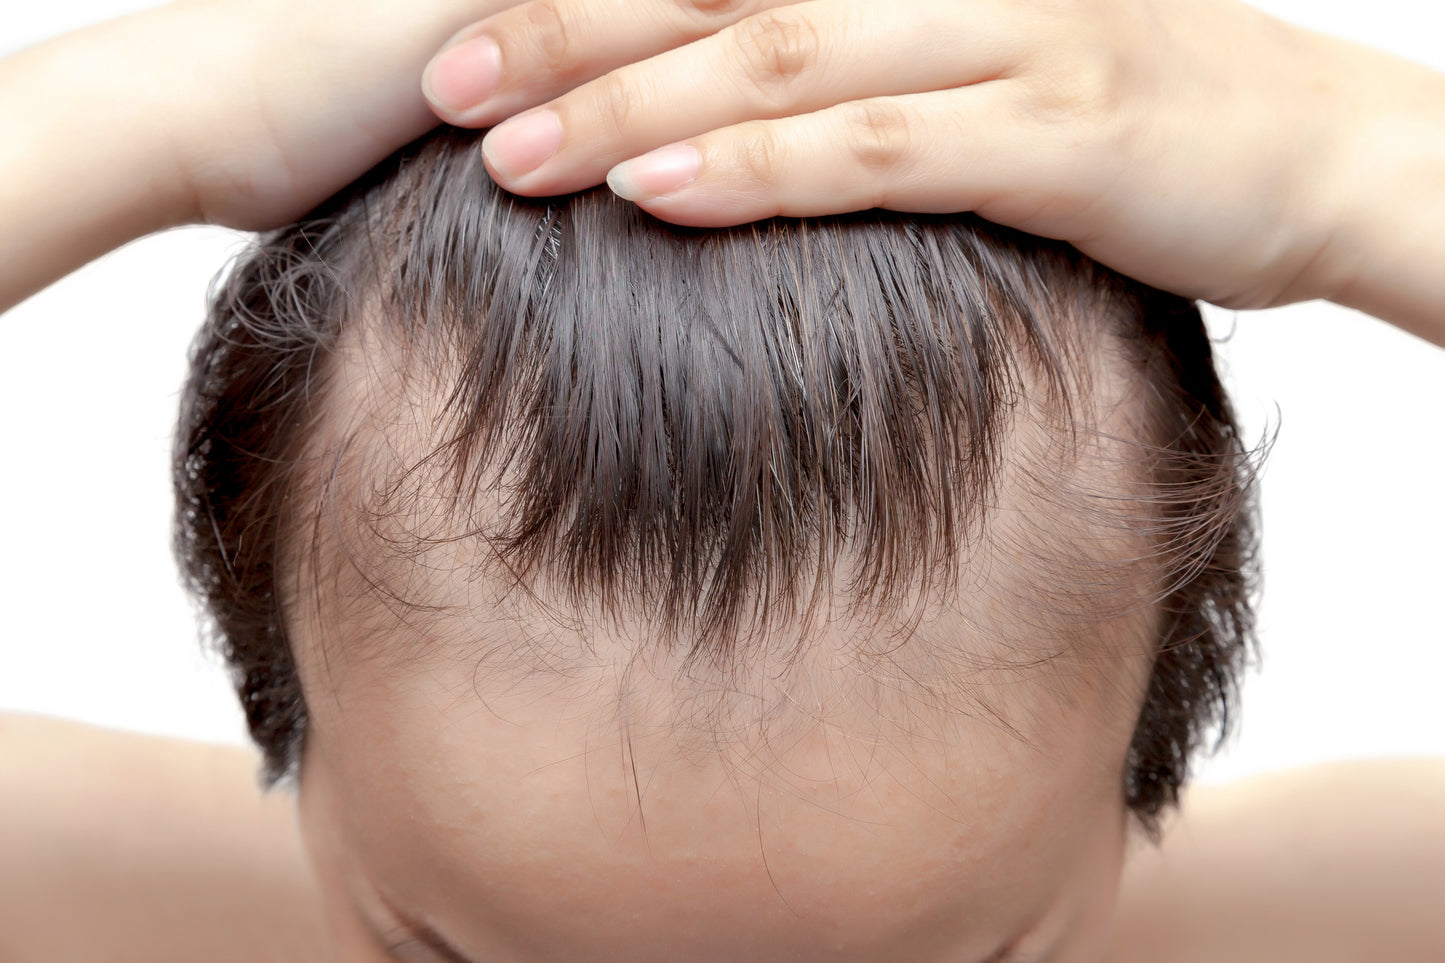 Why’s My Hair Thinning? 4 Main Factors Into Thinning Hair for Males & Females